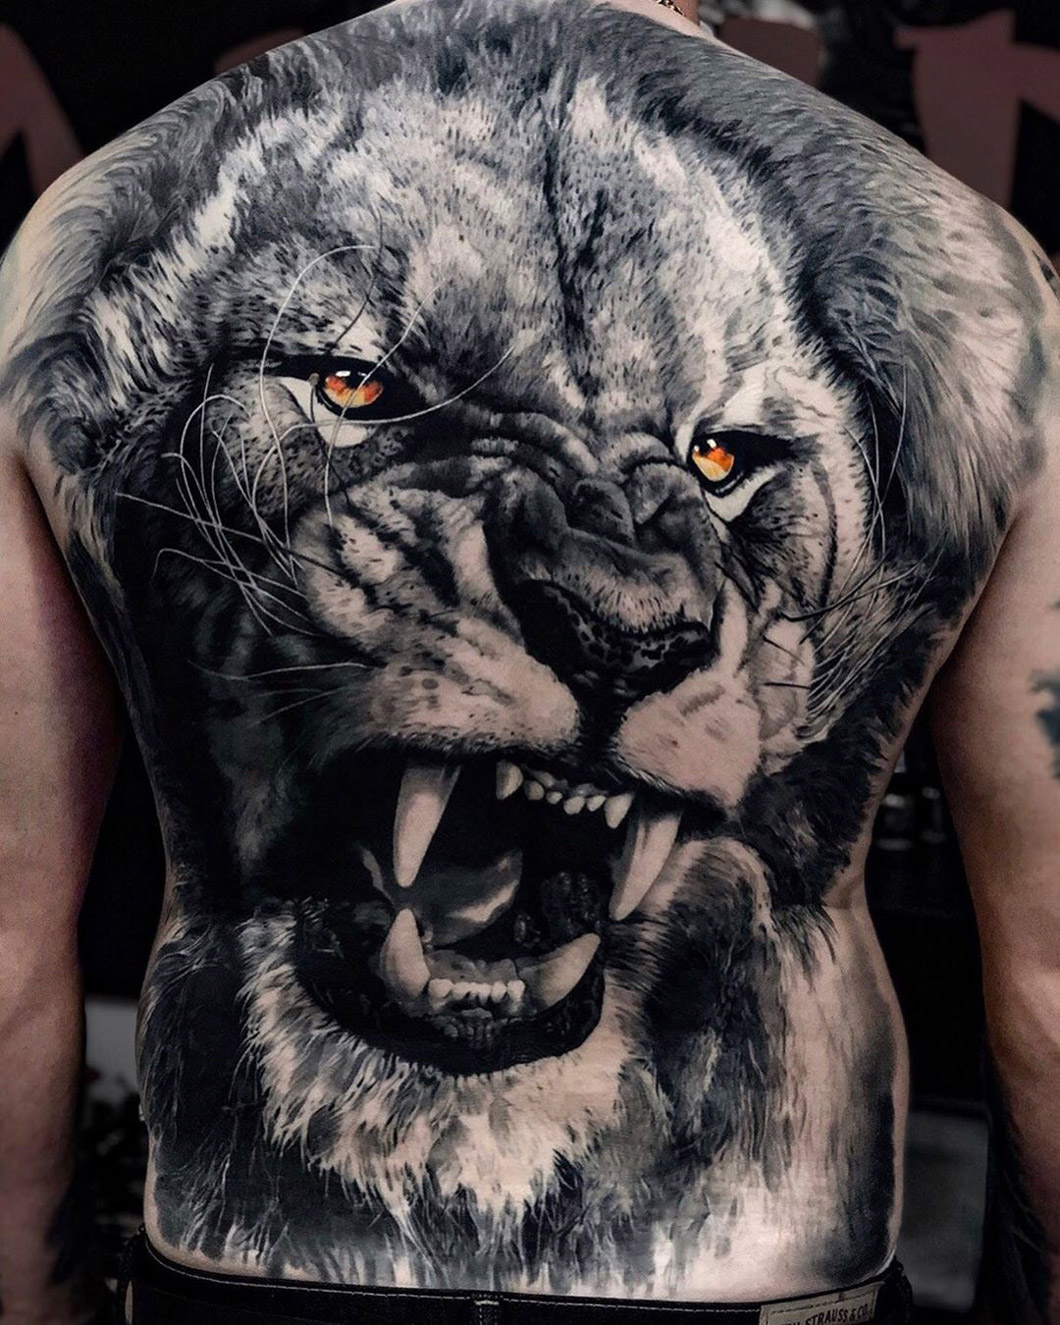 30 Best Lion with Crown Tattoo Designs & Ideas For Men and Women